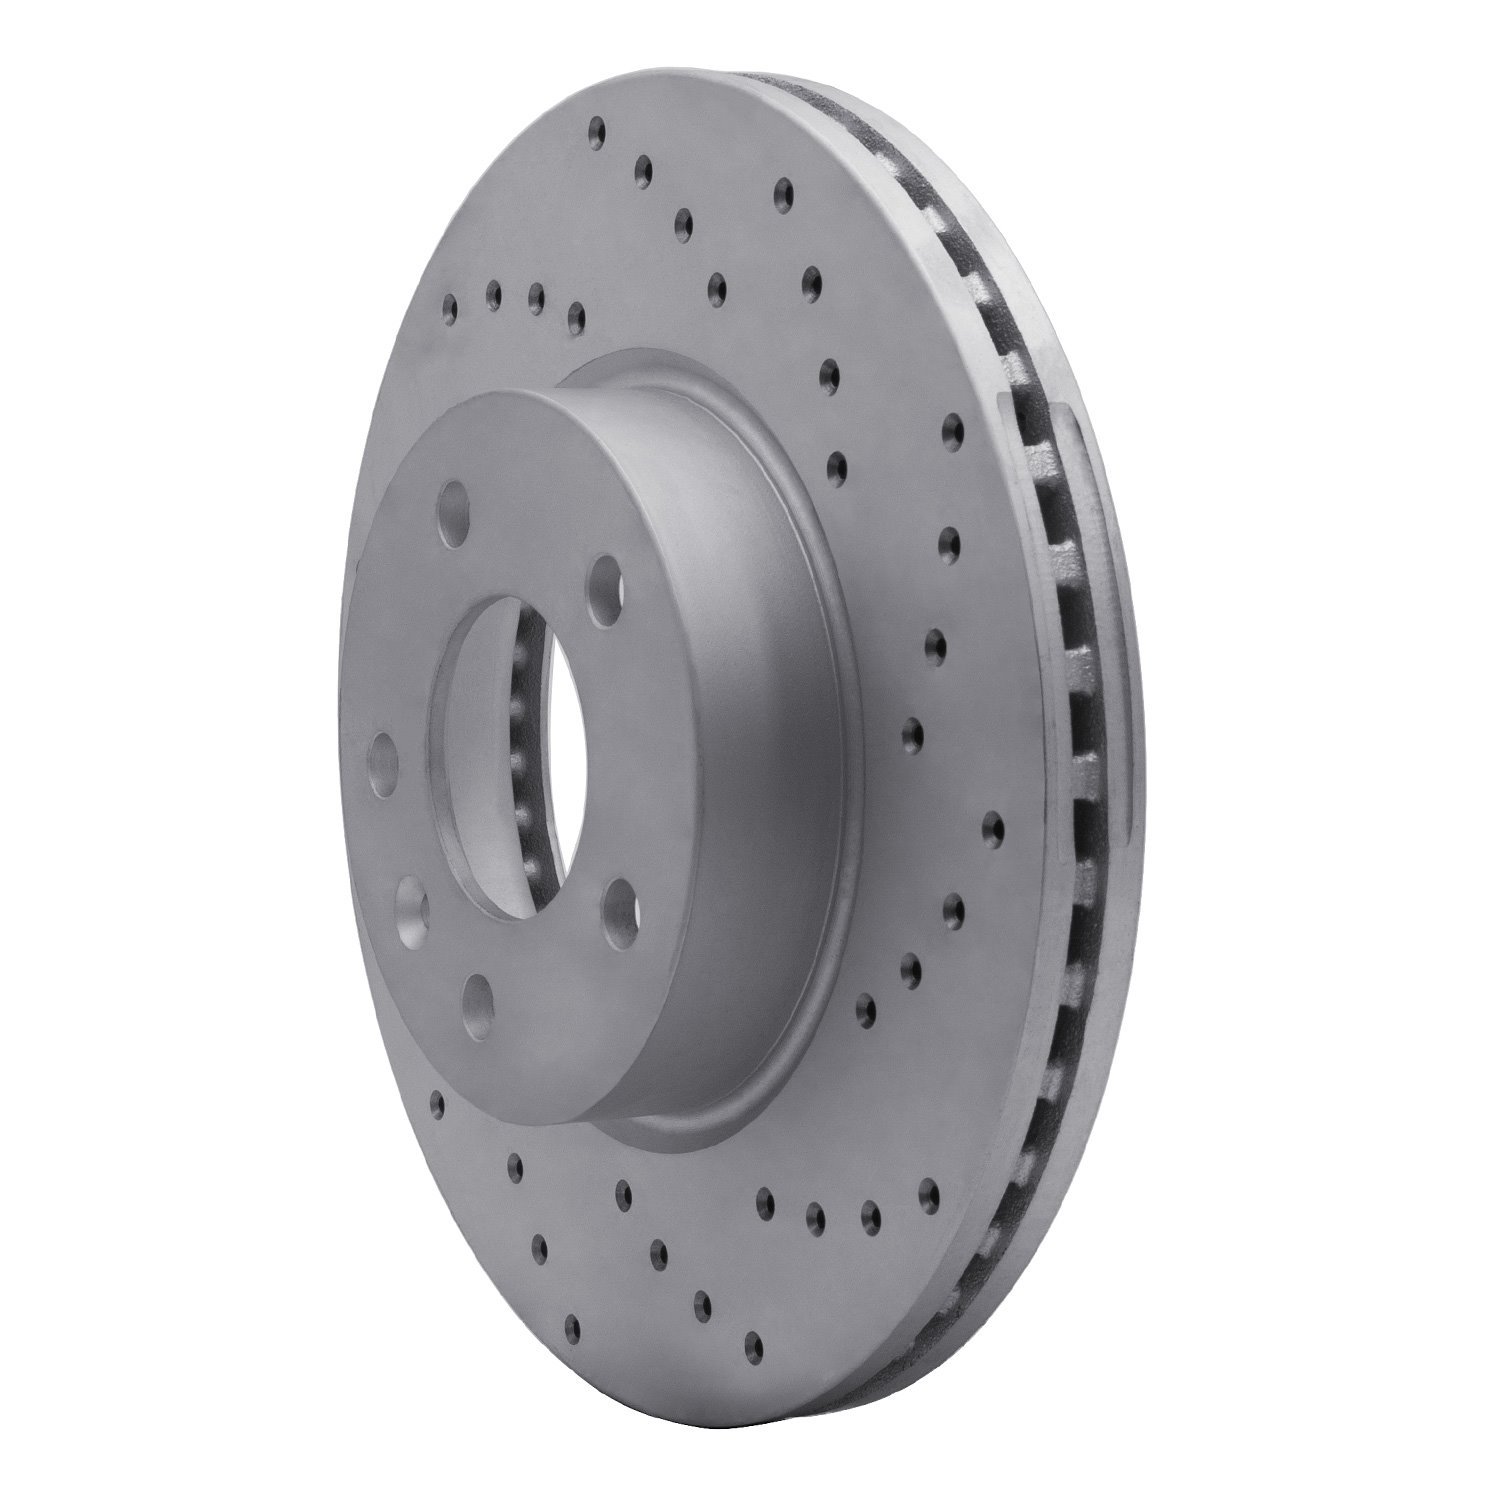 820-46033R Geoperformance Drilled Brake Rotor, Fits Select GM, Position: Front Right